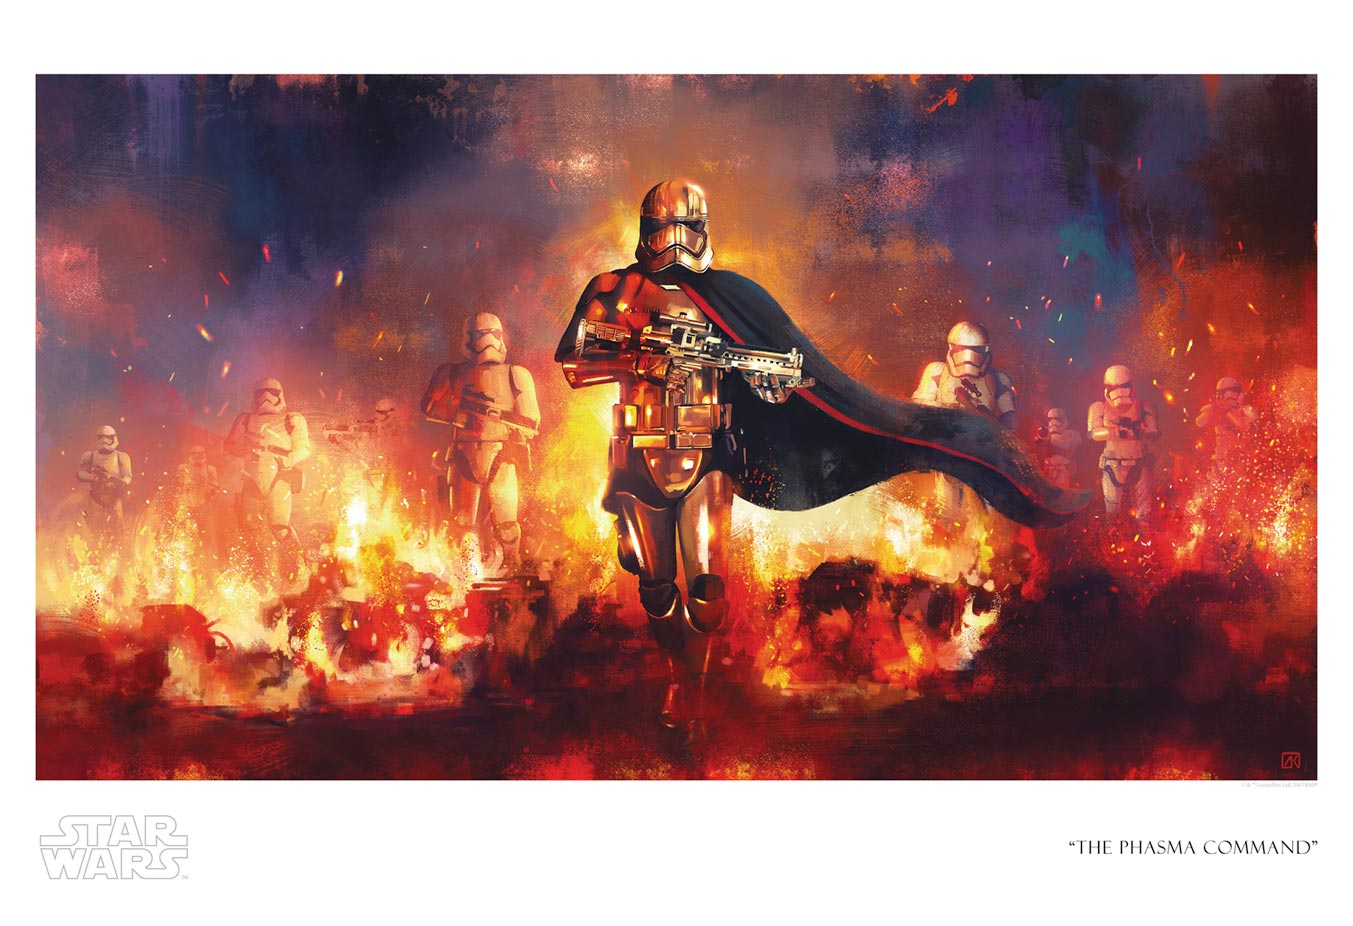 Captain Phasma leads the Stormtroopers into battle. Paper